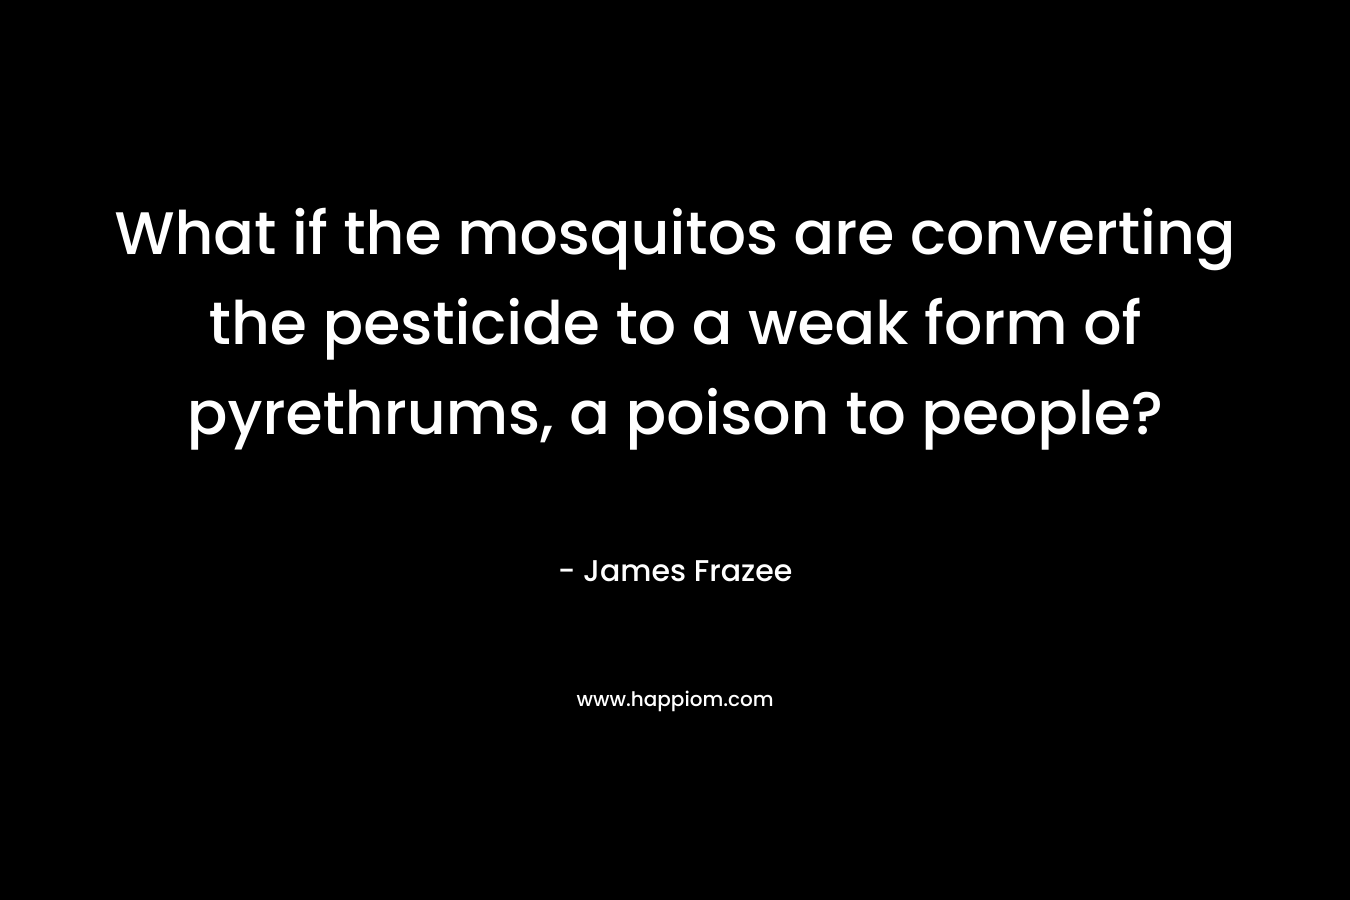 What if the mosquitos are converting the pesticide to a weak form of pyrethrums, a poison to people? – James Frazee